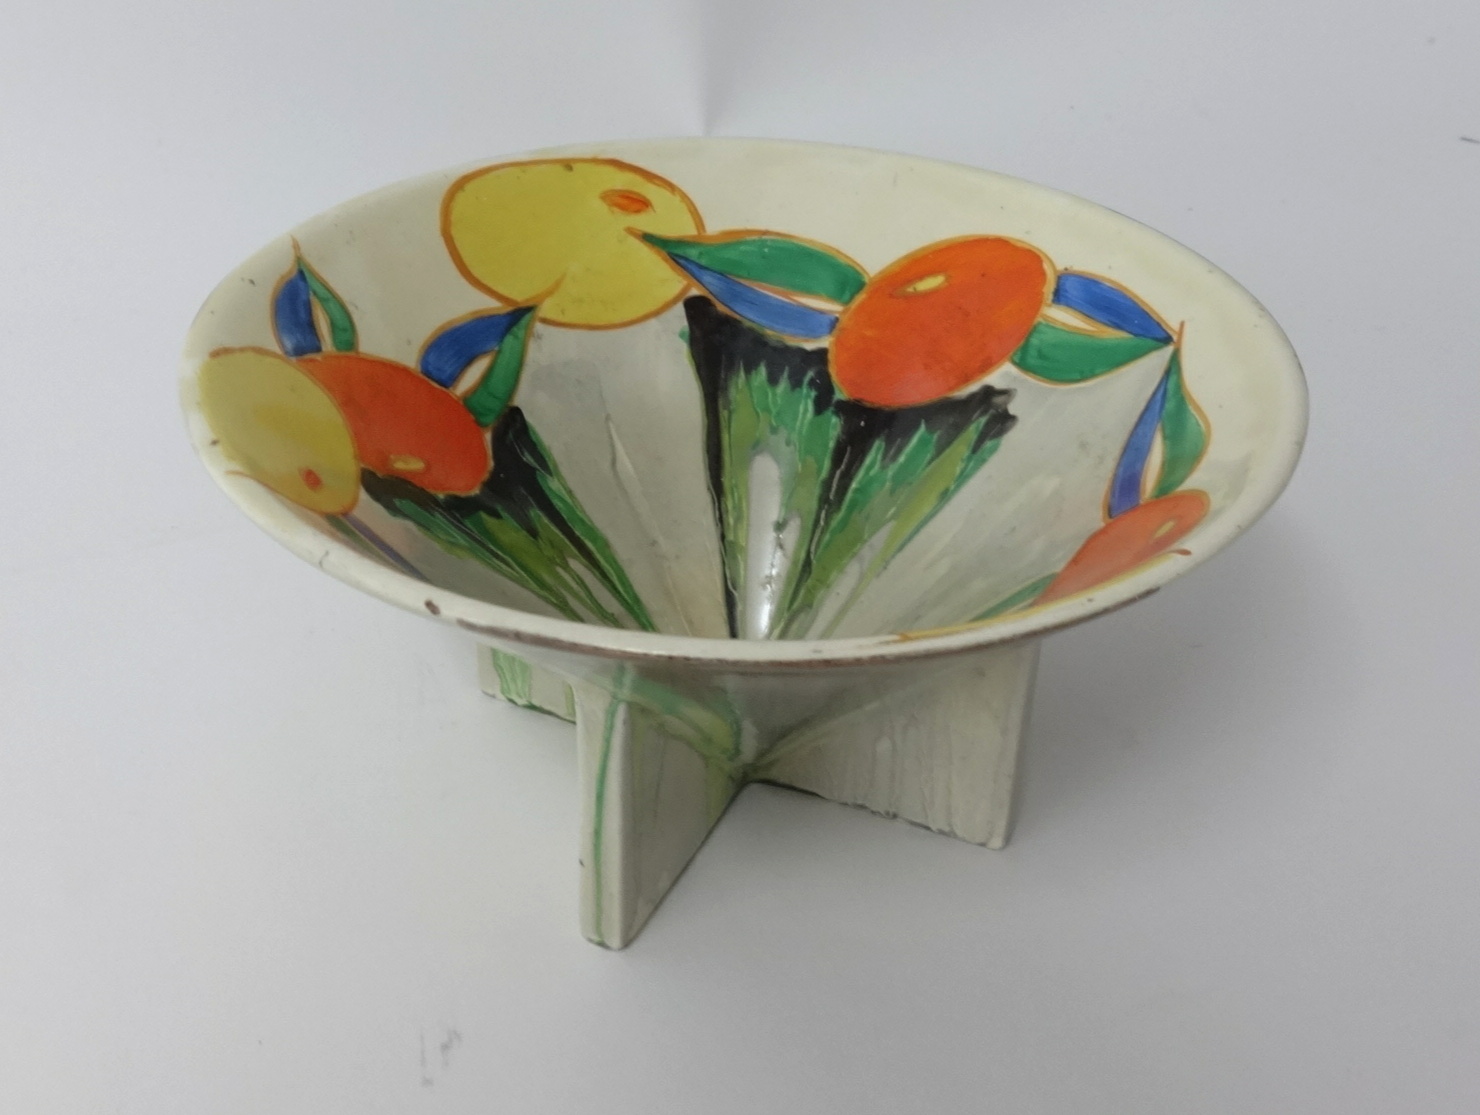 A Clarice Cliff, Bizarre conical bowl decorated with oranges and lemons, diameter 19.5ocm. - Image 4 of 4